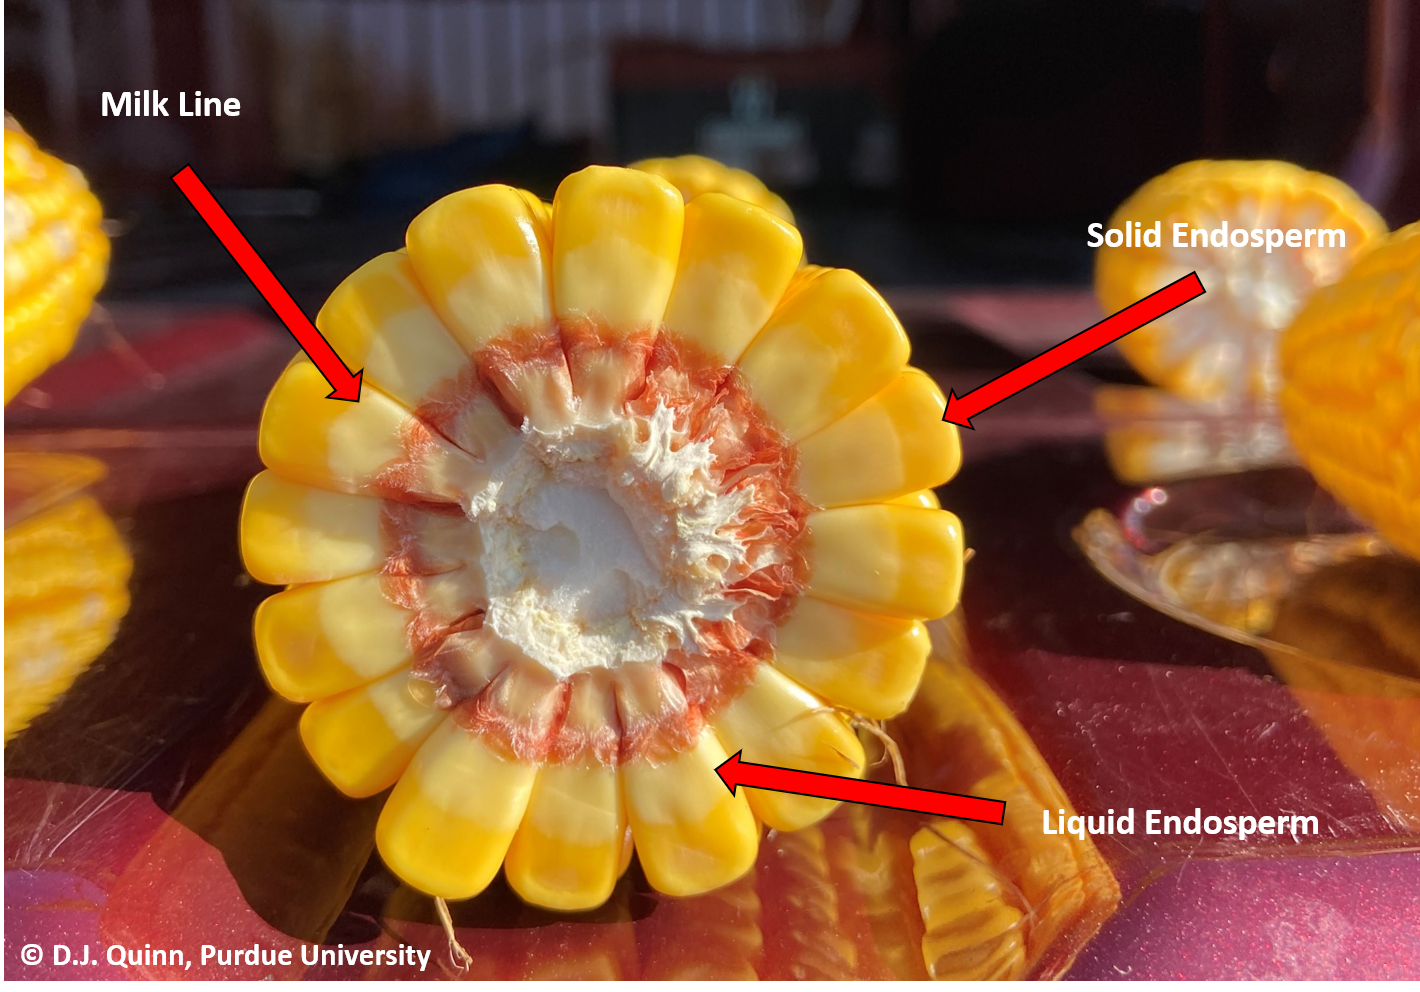 Figure 2. Solid endosperm, liquid endosperm, and milk line appearance in corn during the R5 growth stage. 